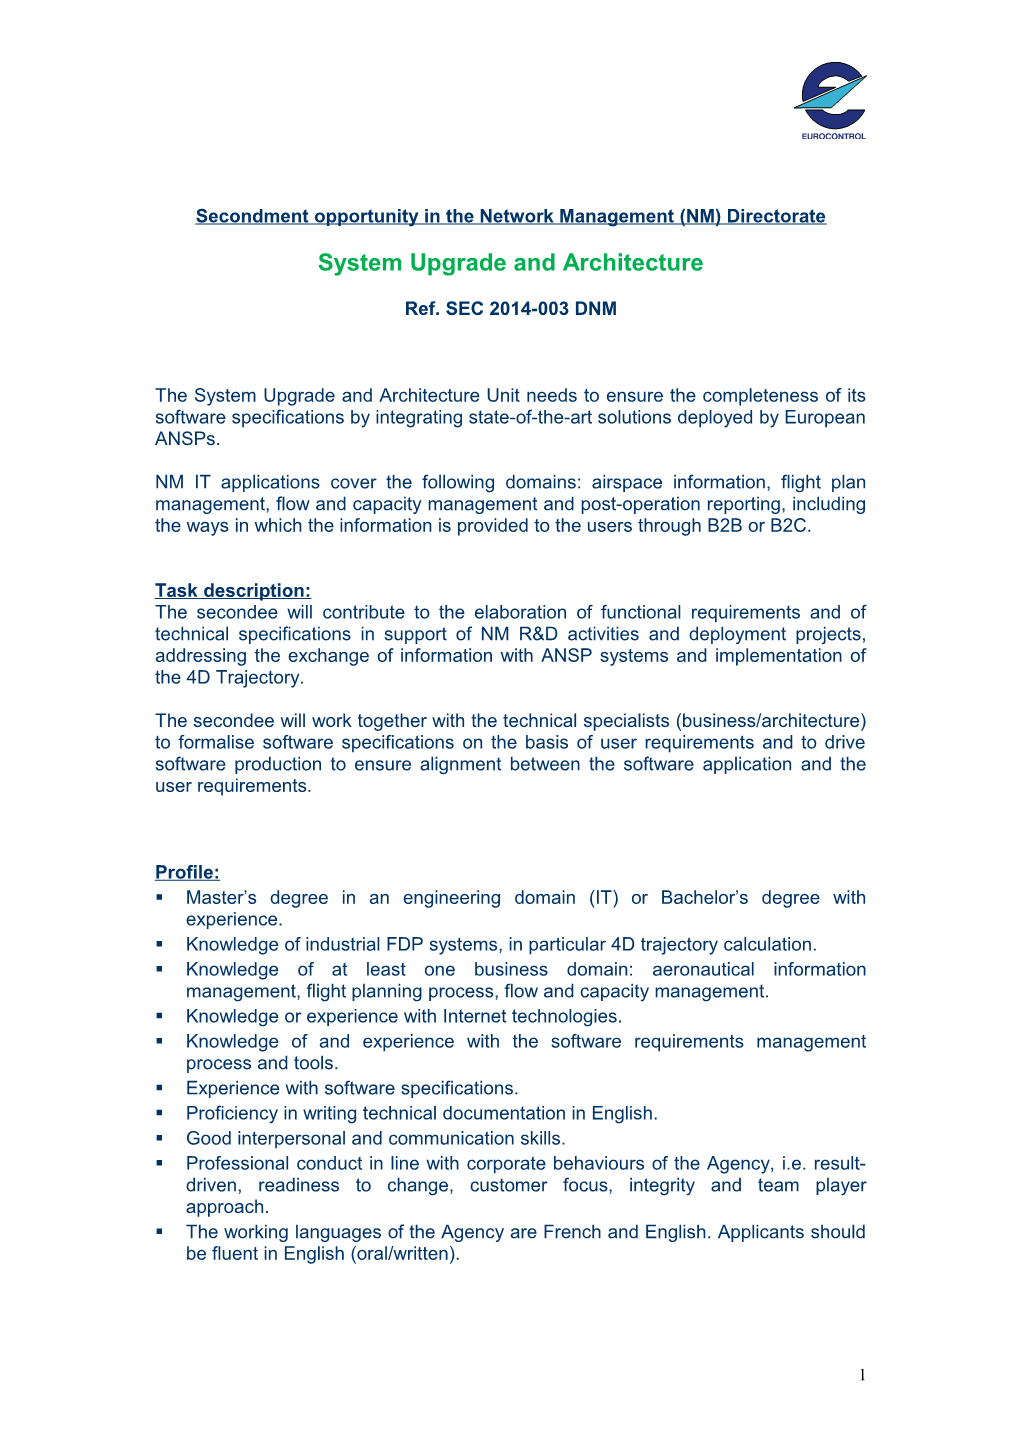 Secondment Opportunity in the Networkmanagement (NM) Directorate